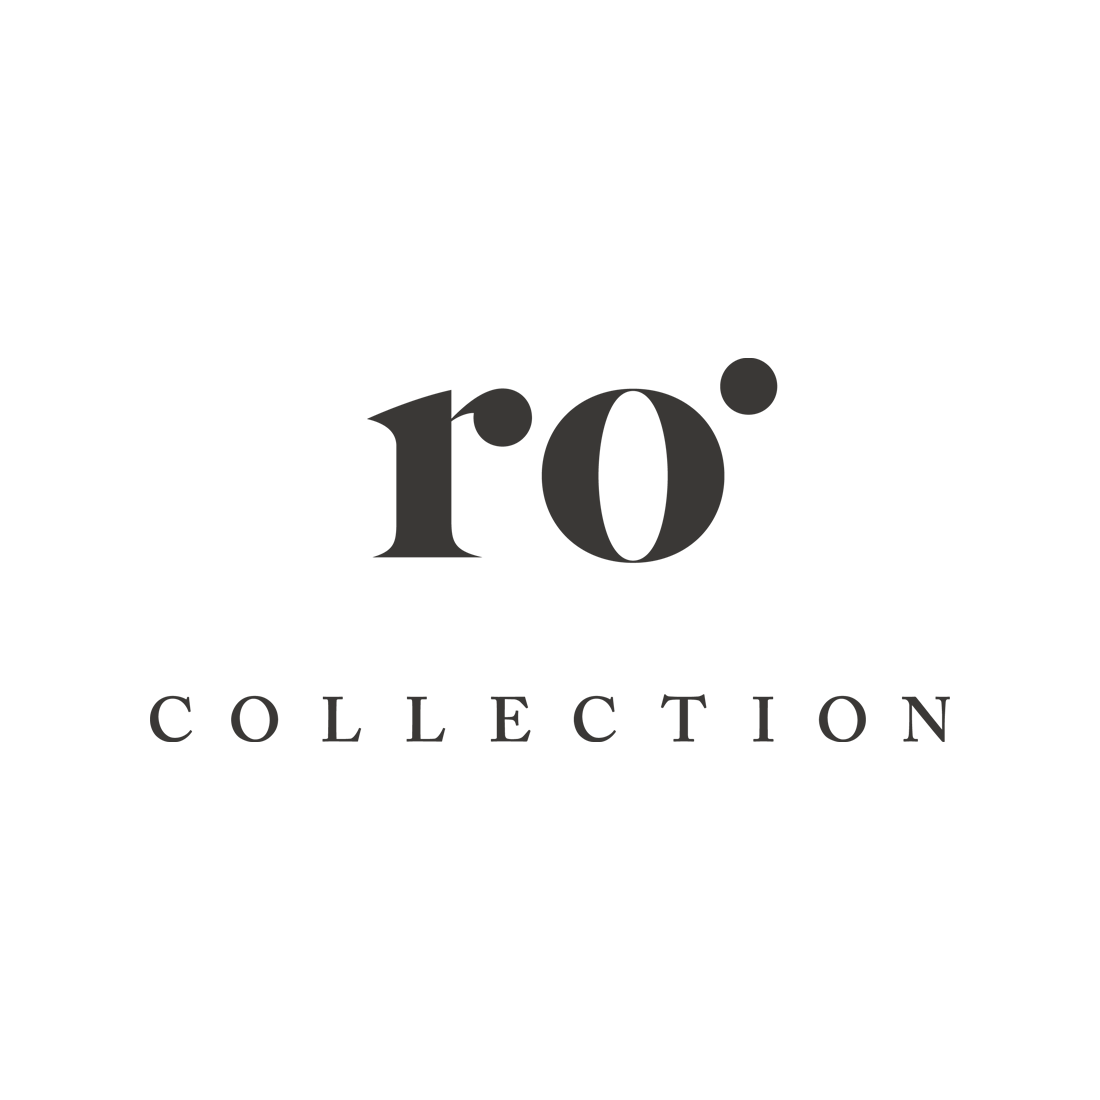 Ro Collection